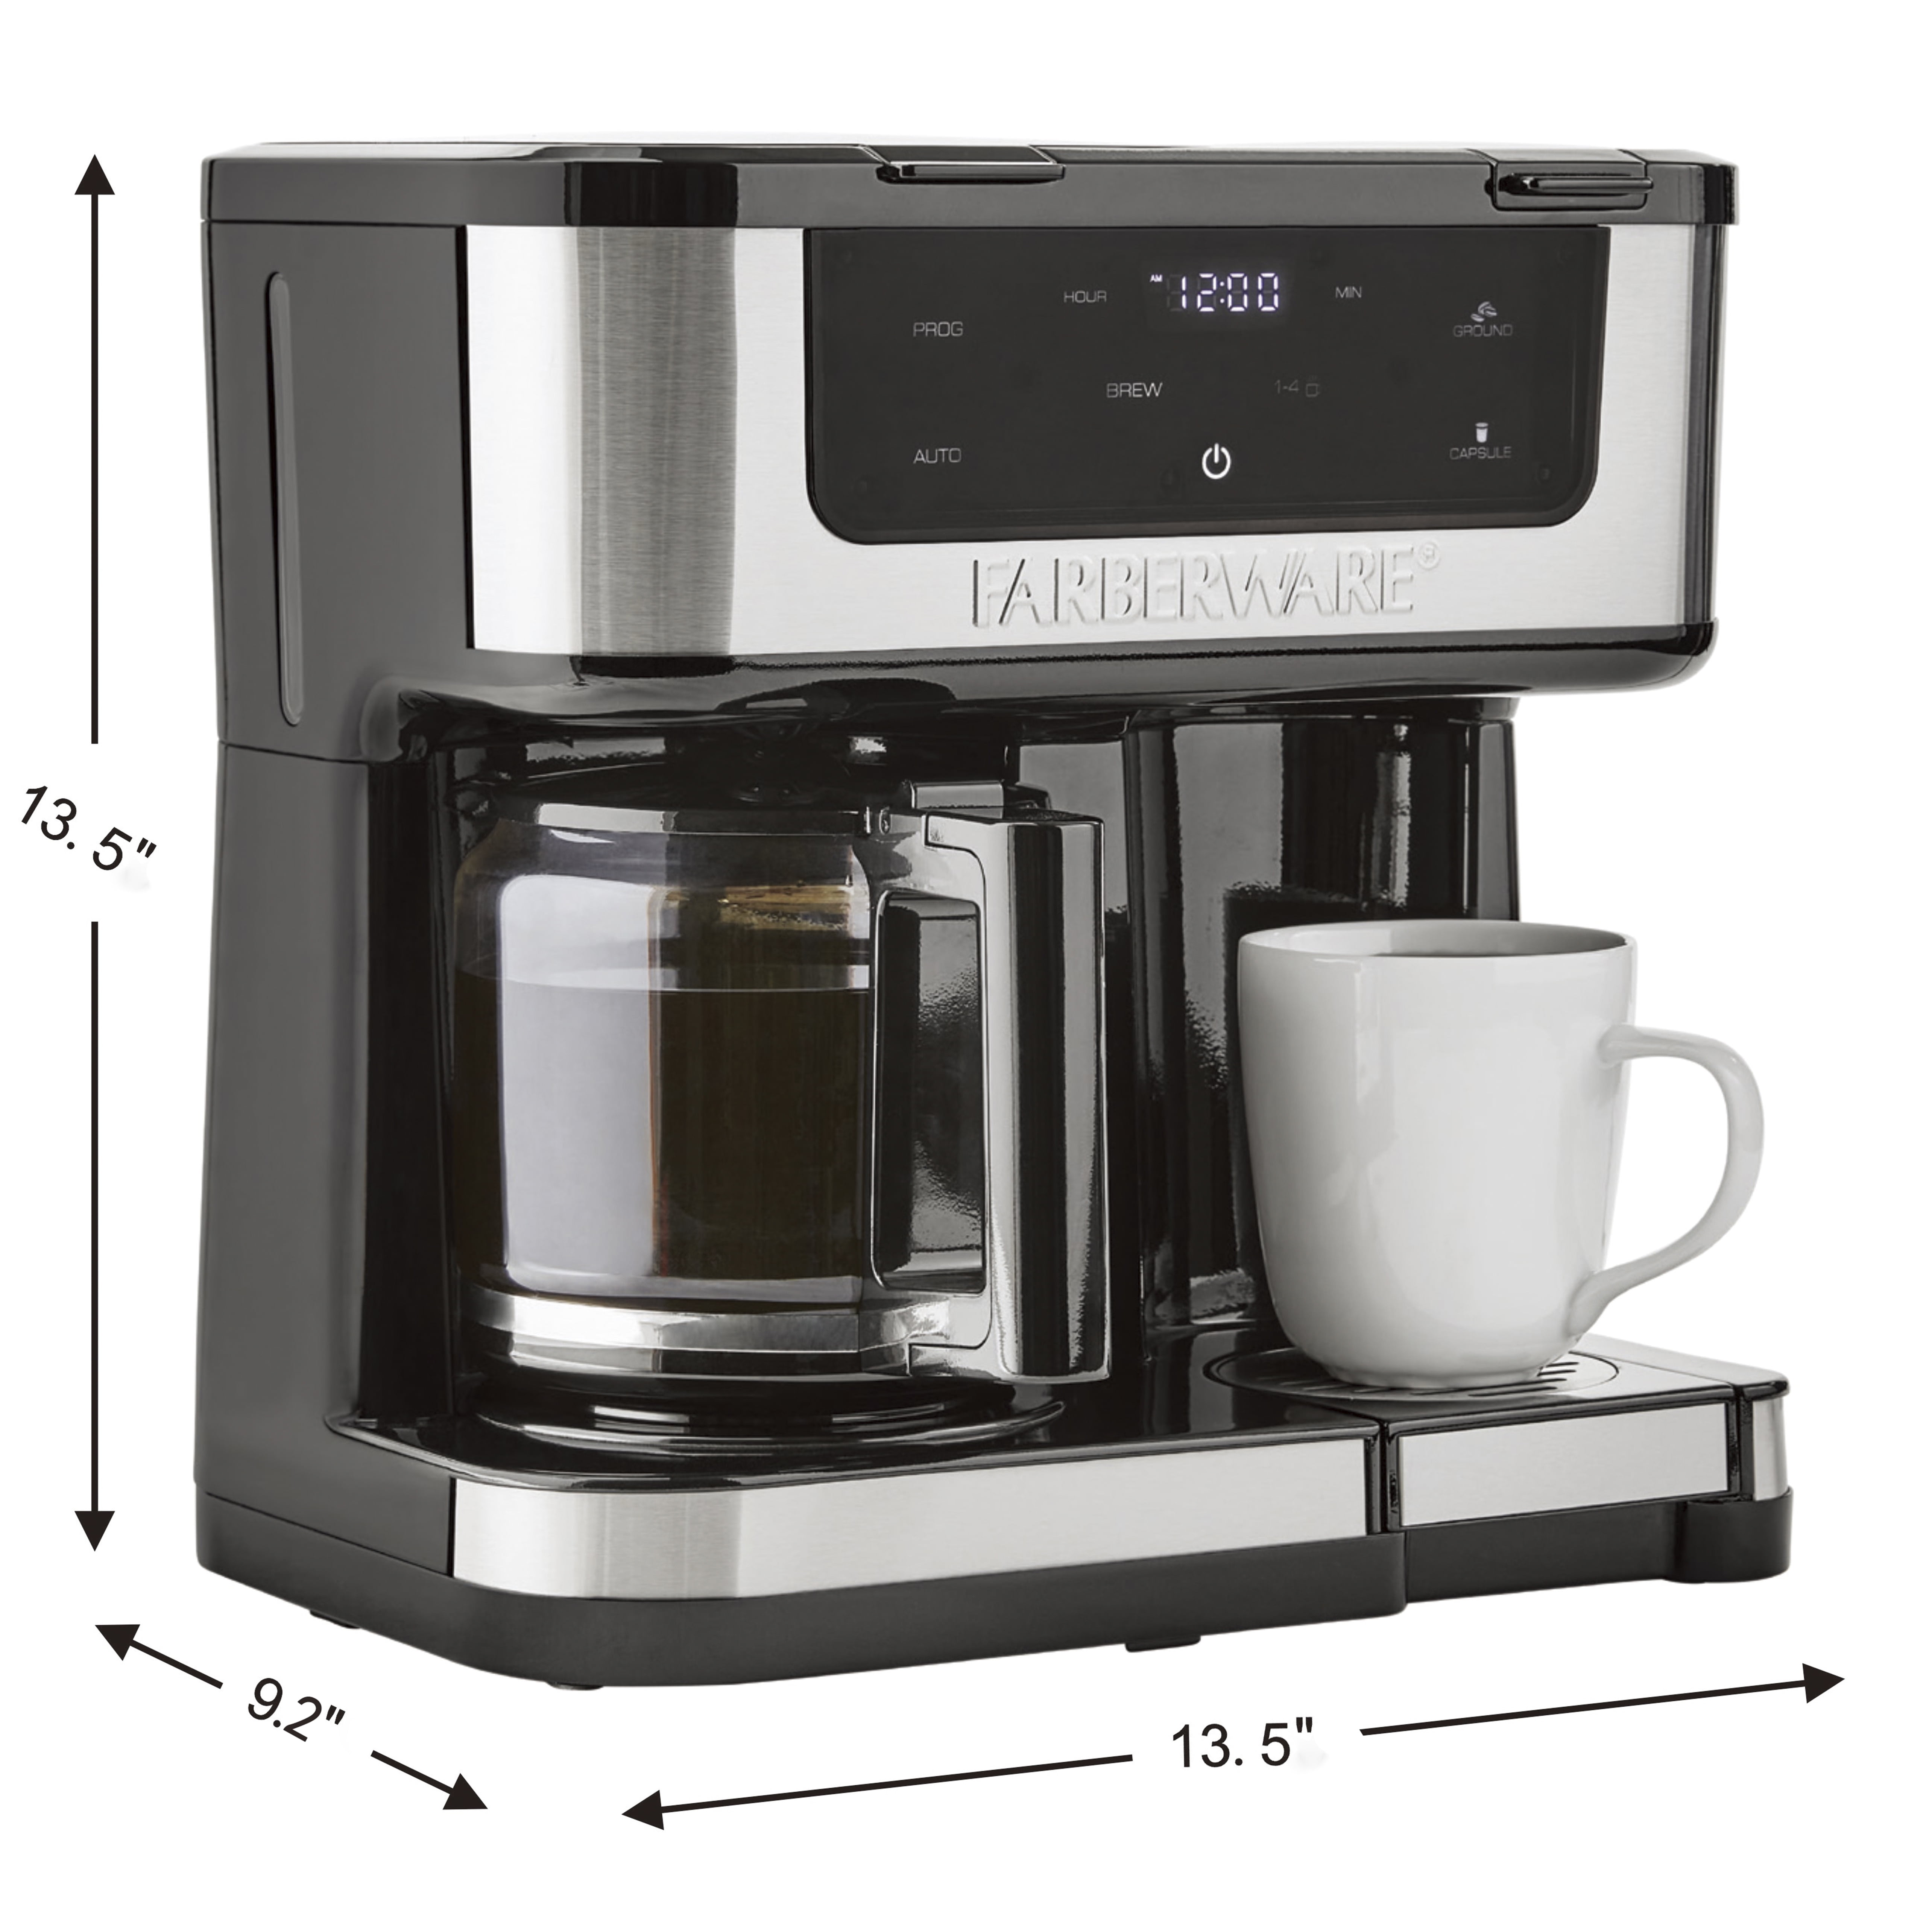 Directions for a Farberware Superfast Coffee Maker